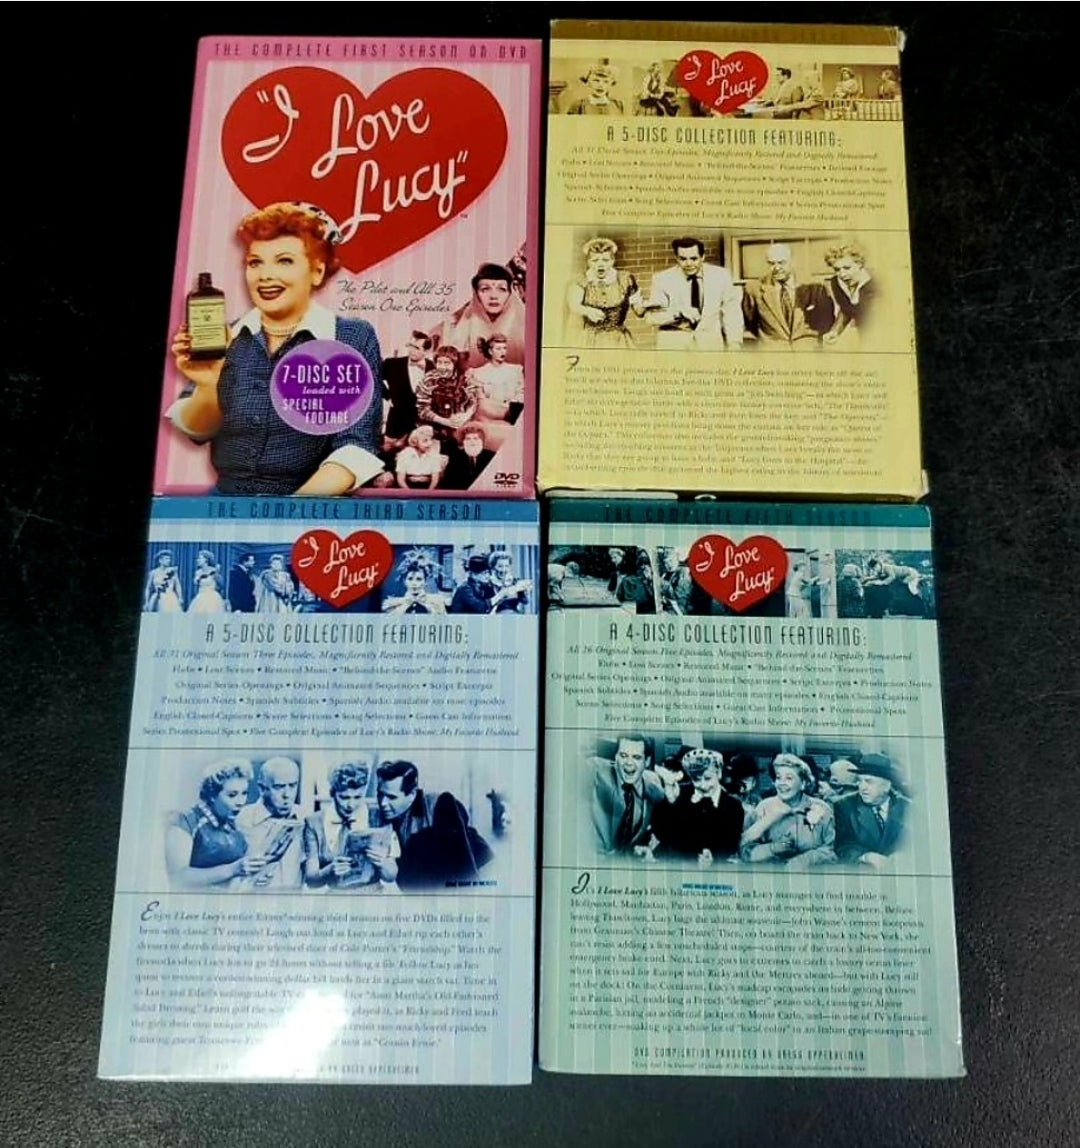 NIB *Ready to Laugh? "I LOVE LUCY" Complete Seasons 1-3, 5